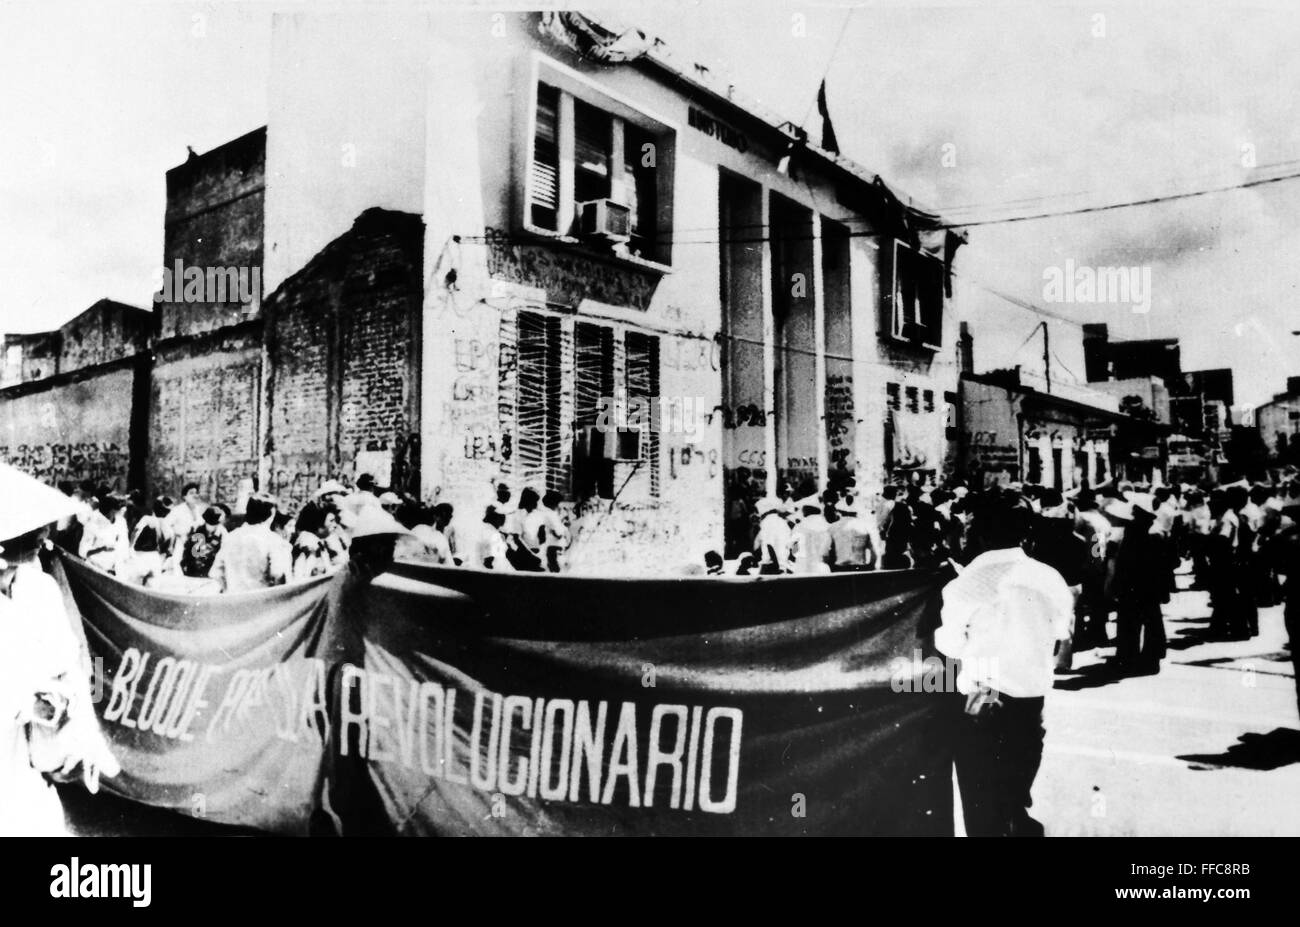 EL SALVADOR, 1979. /nSome 200 members of the Popular Revolutionary Block (BPR), a leftist revolutionary group, occupy and surround the Ministry of Labor in San Salvador, taking hostages and demanding higher salaries and lower food prices from the new Revo Stock Photo